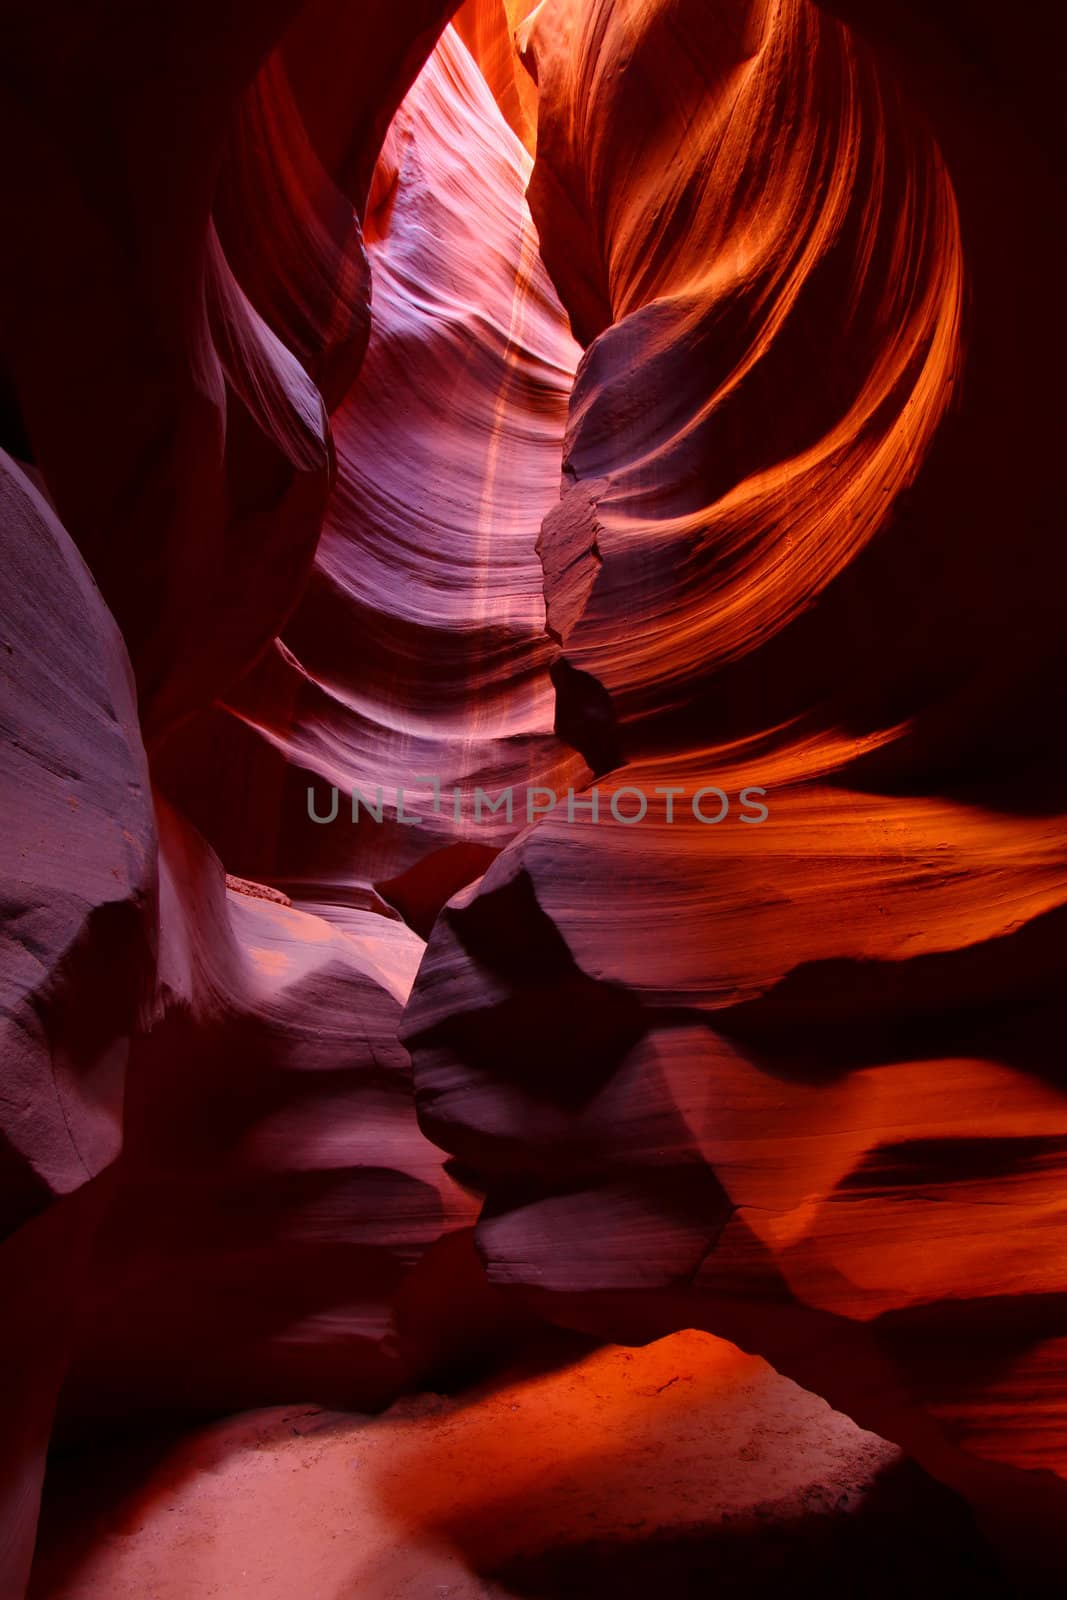 Amazing scenery of a slot canyon in the southwestern United States.